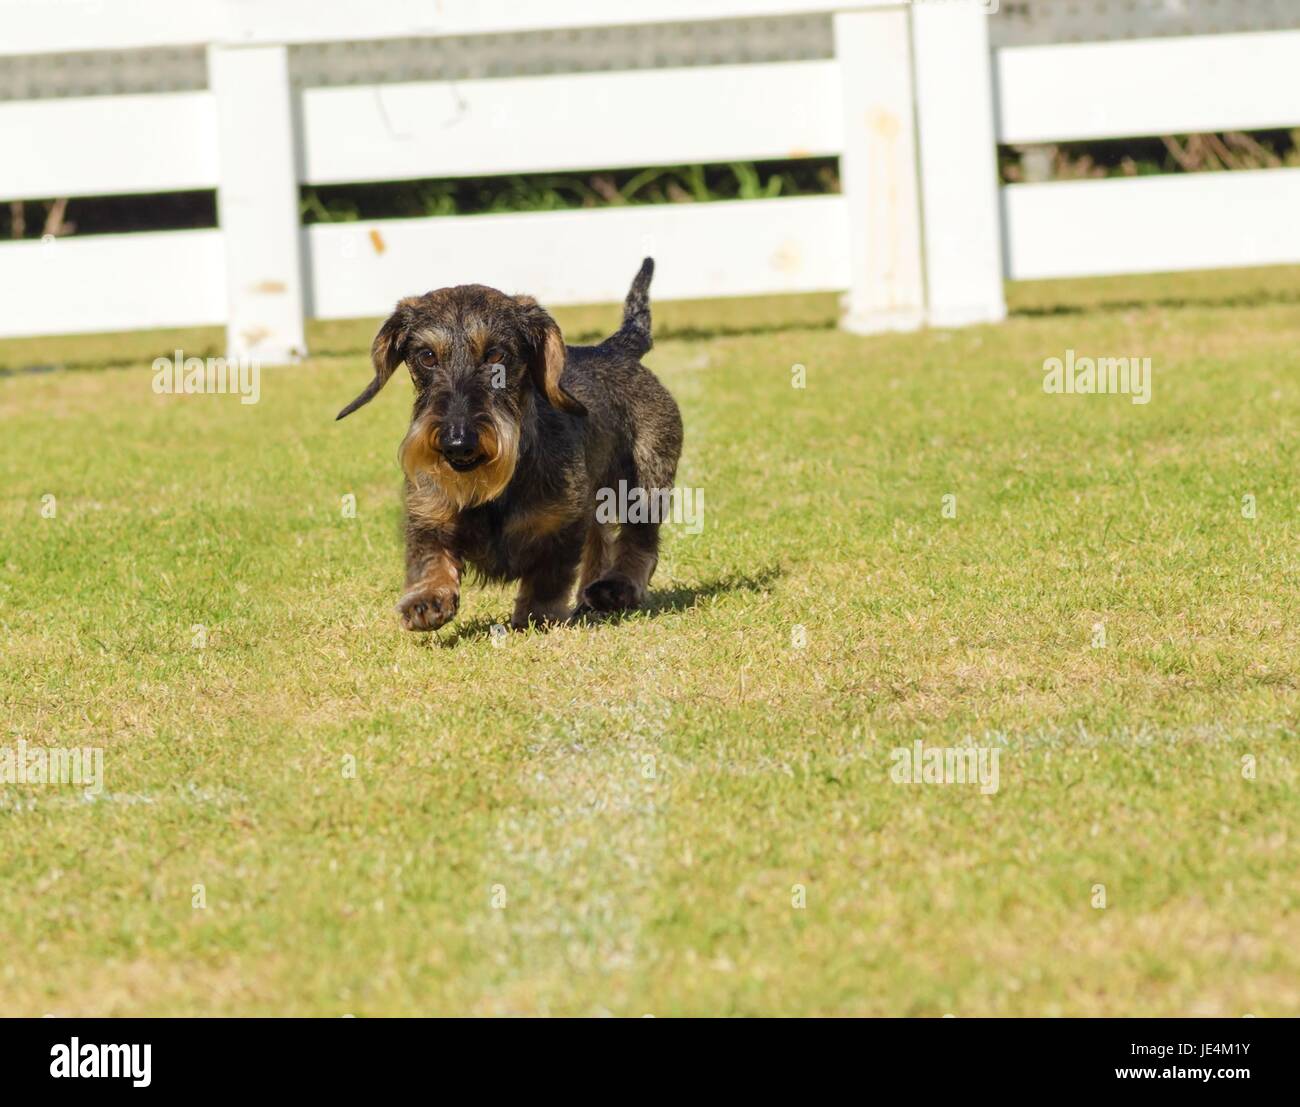 A young beautiful dapple black and tan Wirehaired Dachshund walking on the grass. The little hotdog dog is distinctive for being short legged with a long body, pointy nose and narrow build. Stock Photo